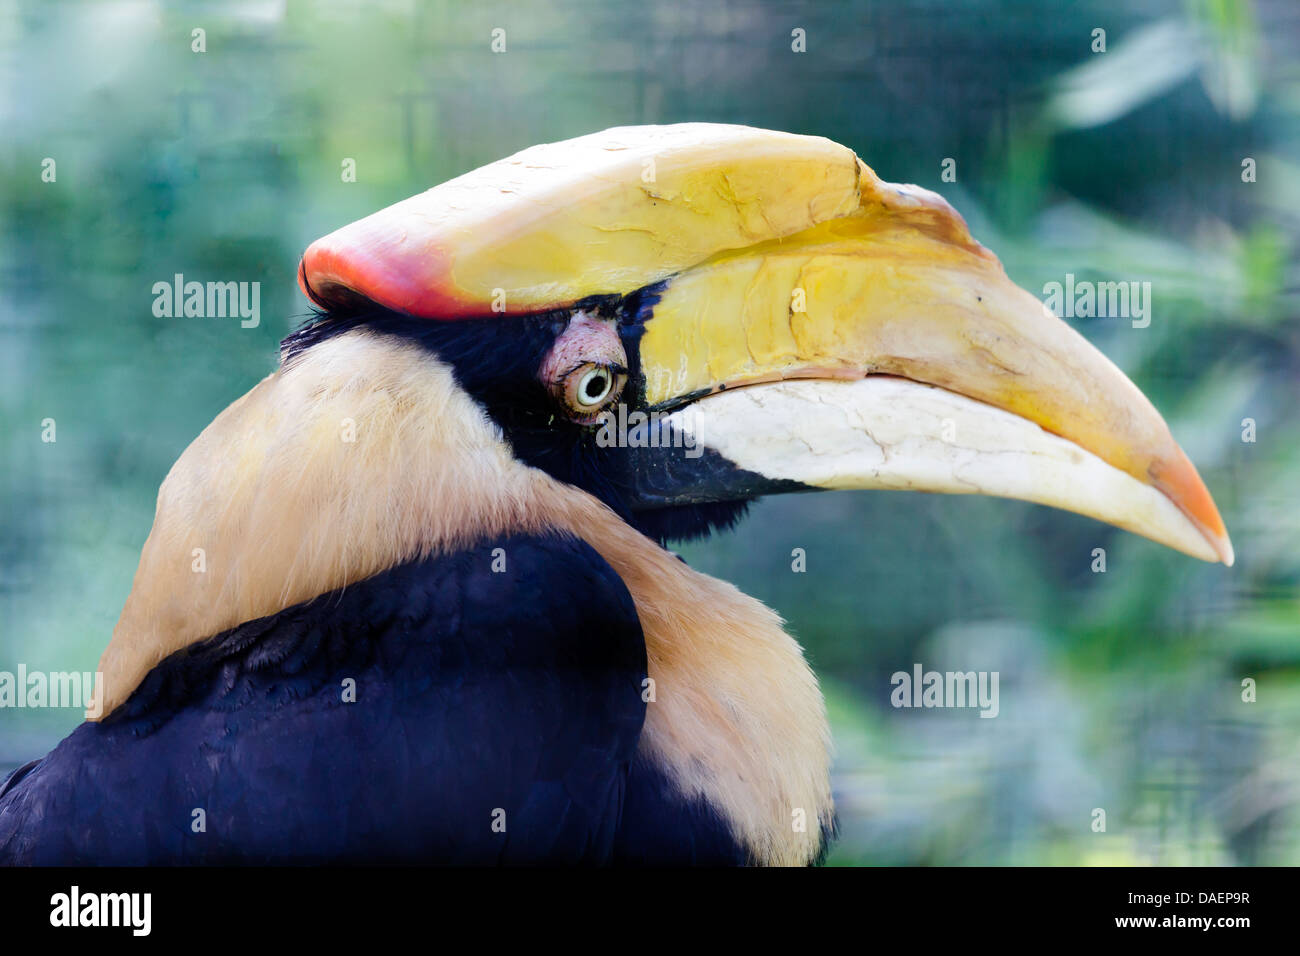 hornbill bird portrait on a background of leaves Stock Photo